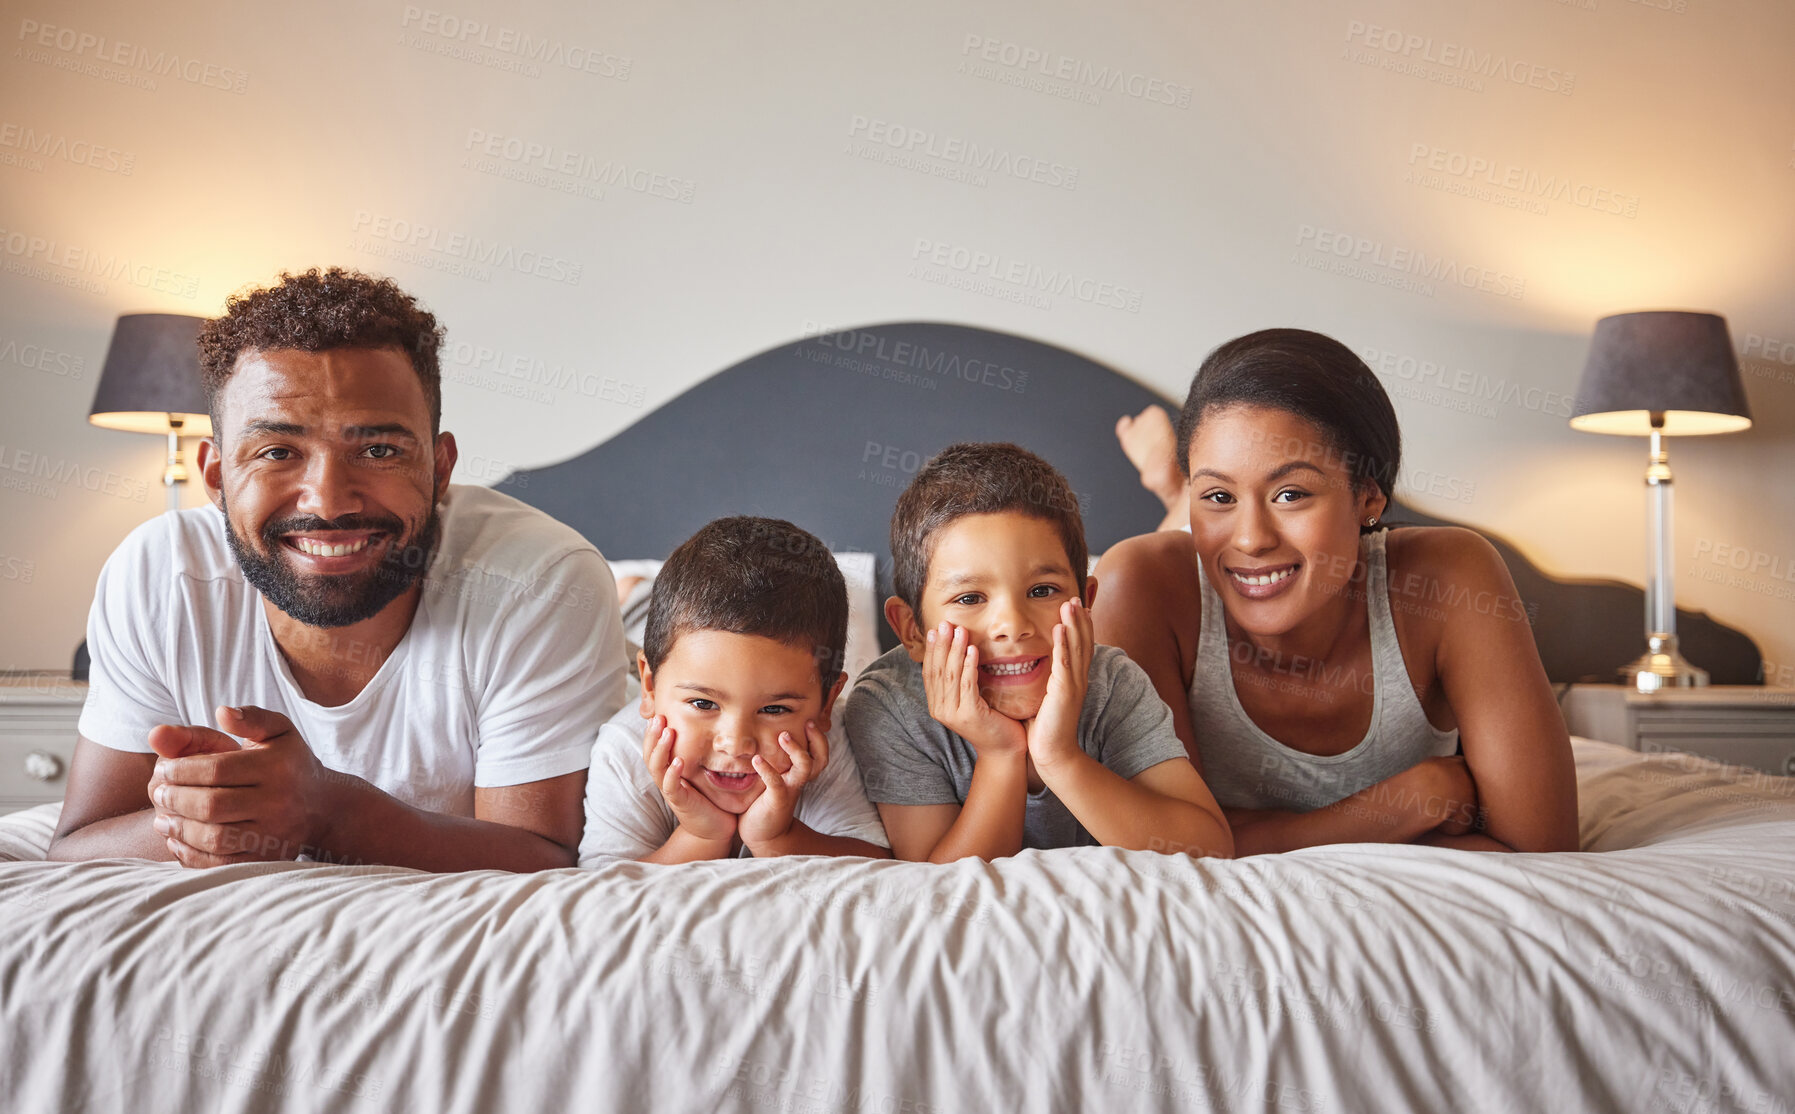 Buy stock photo Portrait of parents and kids lying on bed in the morning with a smile. Playful, fun, mom and dad playing indoors showing growth, child development, happiness and childhood innocence from little boys